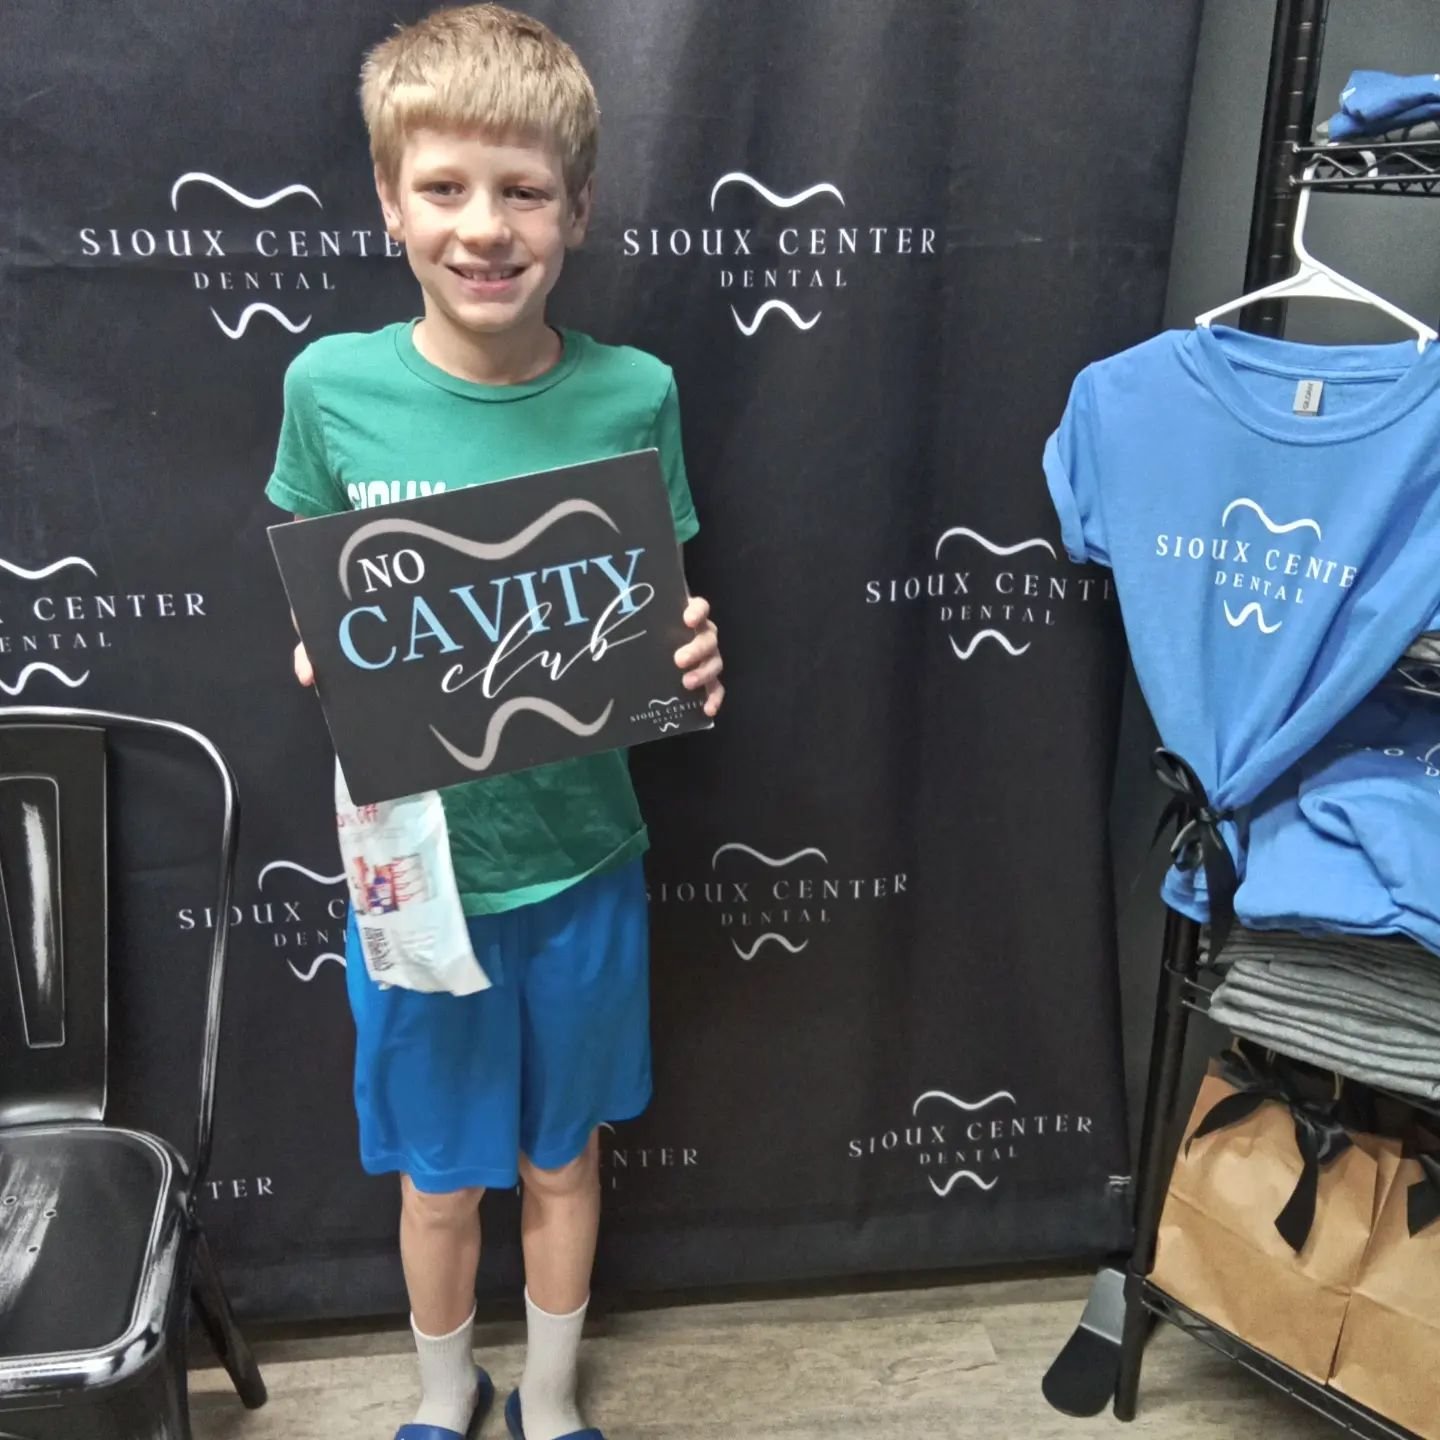 Happy Friday! Wesley was in to see us and he had an awesome visit! 🎉 We are thrilled to report that he is a member of our ⭐No Cavity Club⭐! 🥇 Way to go, Wesley! 👏👏👏 Keep up the great brushing! 😎🦷👍
.
.
.
#siouxcenterdental 
#faithfamilyservice